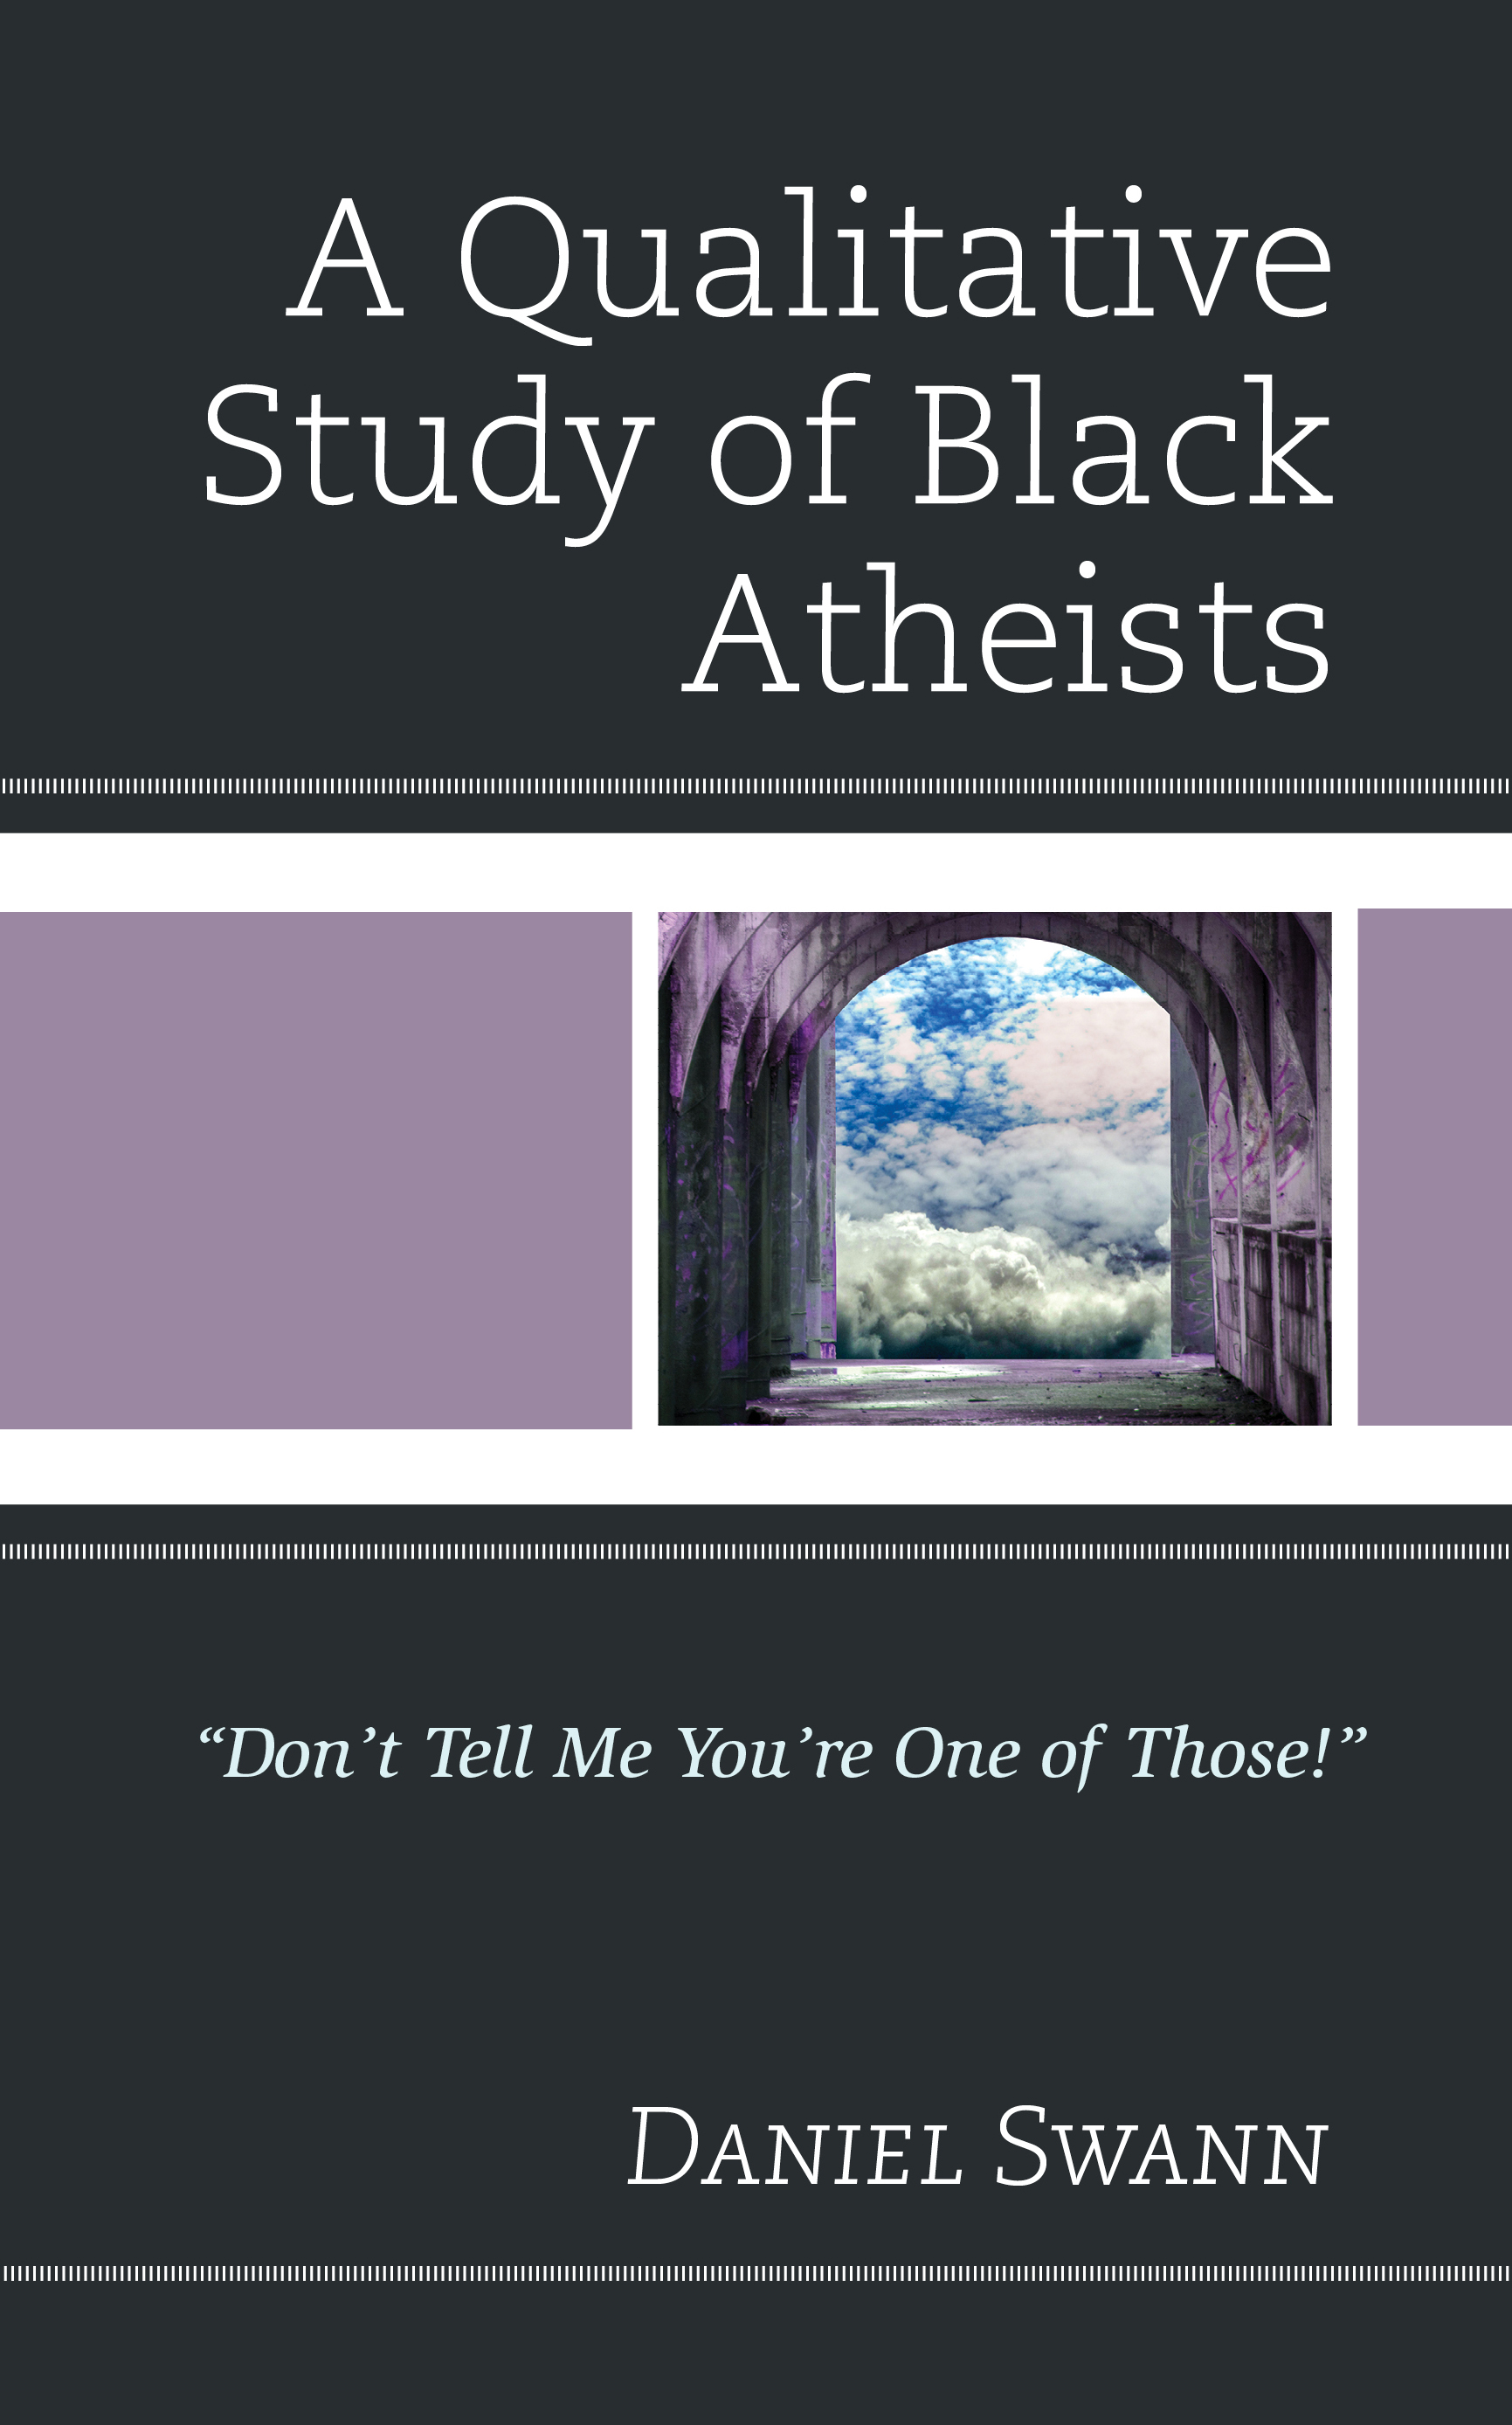 A Qualitative Study of Black Atheists: "Don’t Tell Me You’re One of Those!"